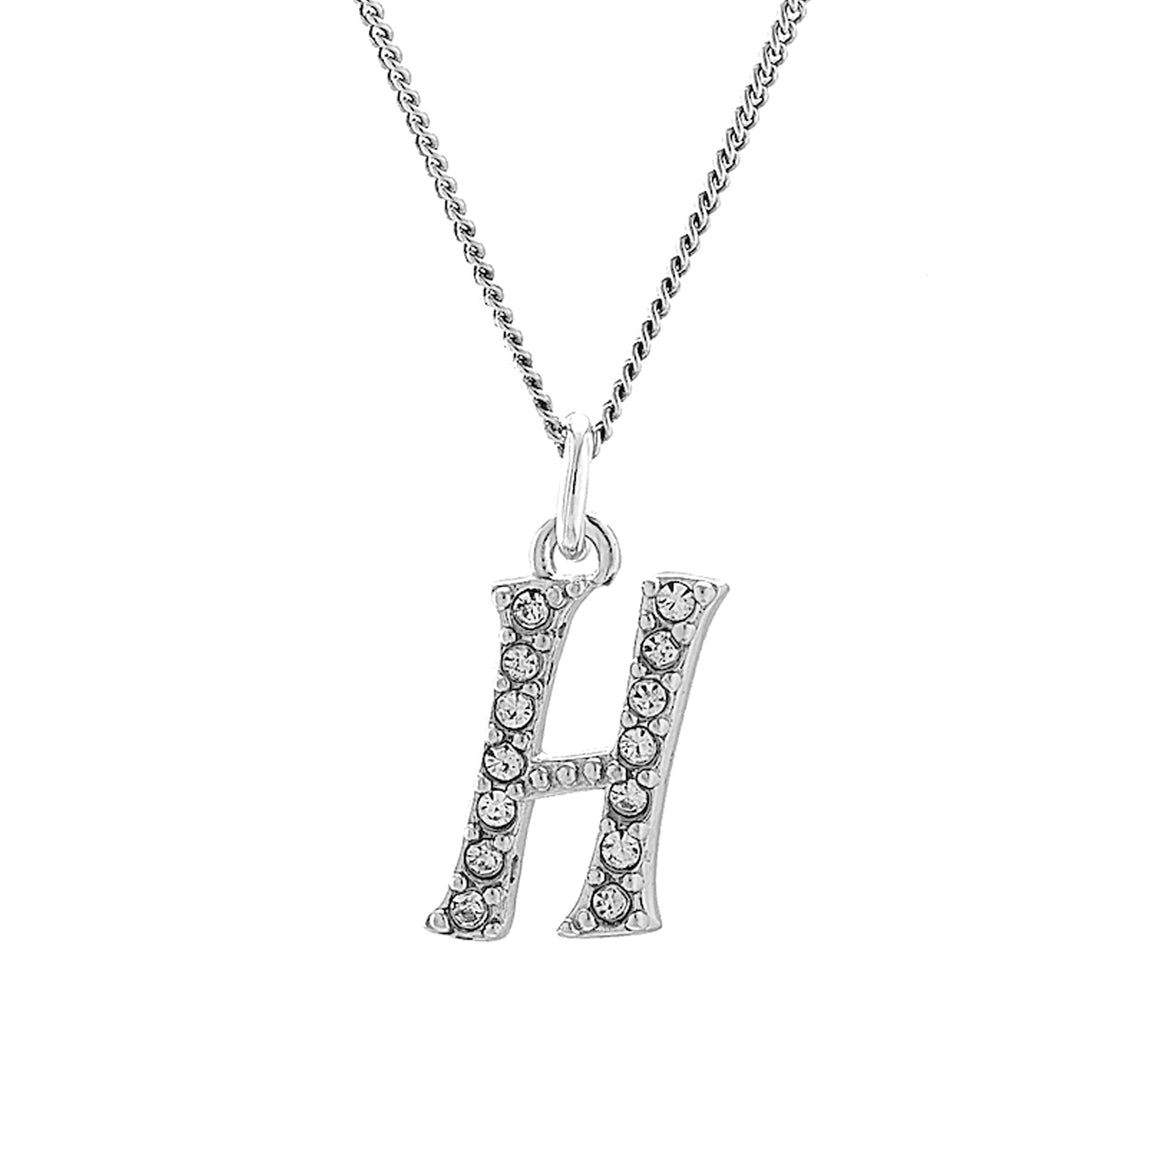 Cubic Zirconia Initial Pendant with 18" Chain - "H"